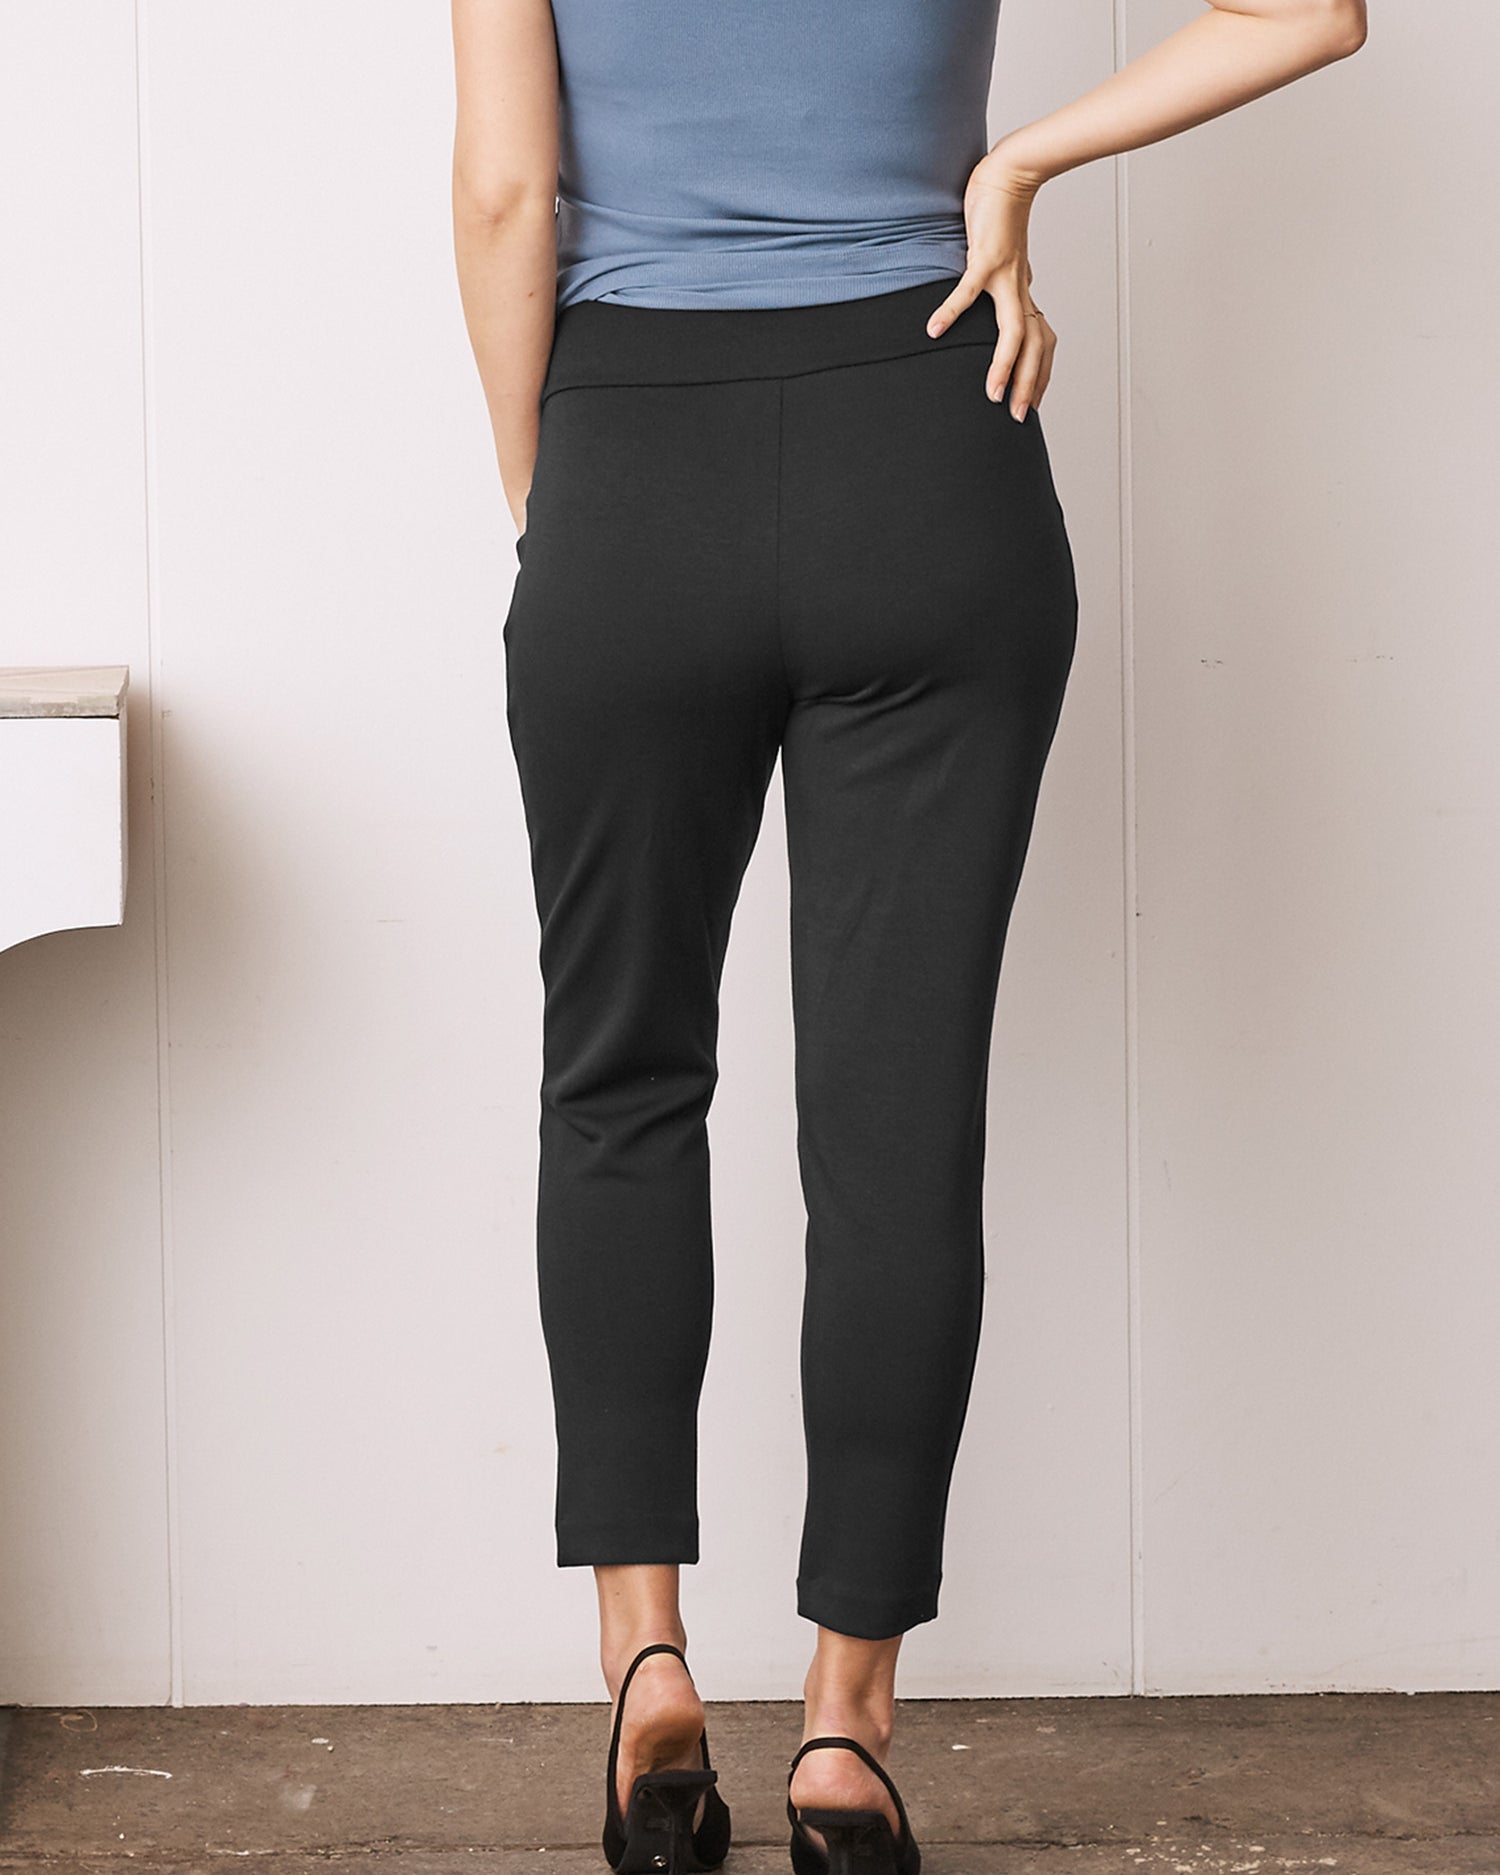 Full Stretch Slim Cut Maternity Work Pants - Ankle Length or Petite (1581995360359)